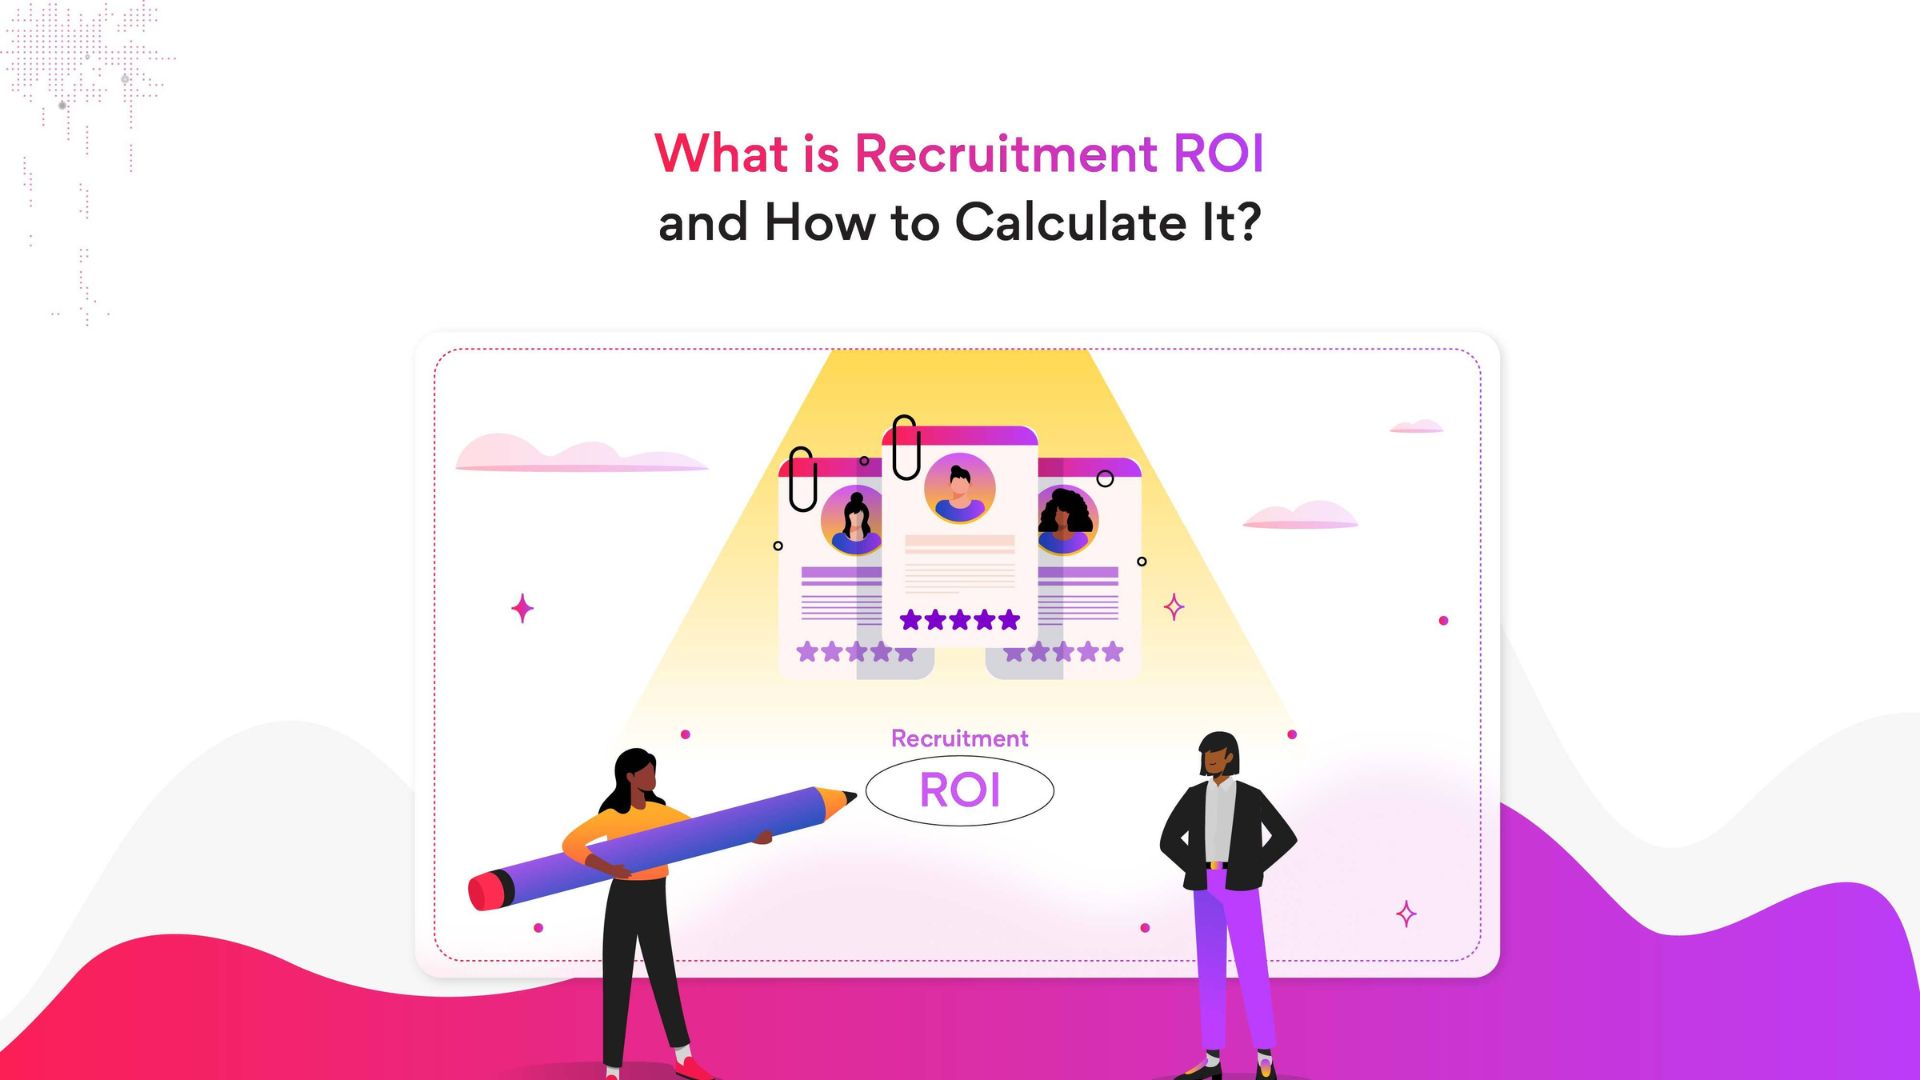 Recruitment ROI and how to calculate it